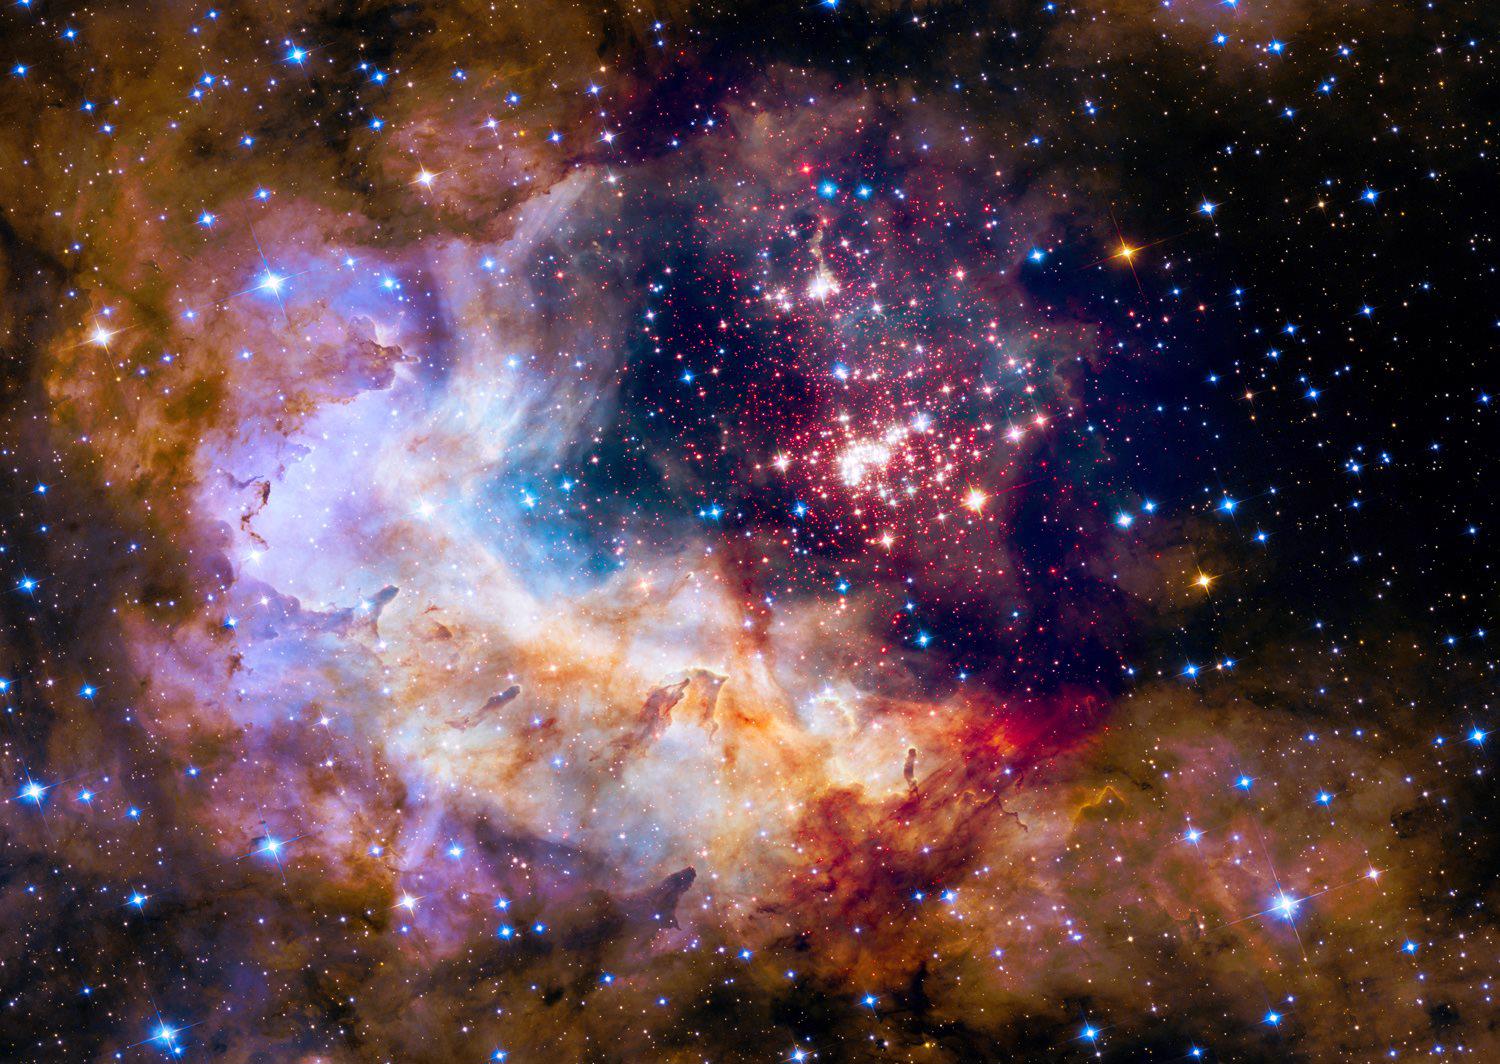 Star Cluster in the Milky Way Galaxy